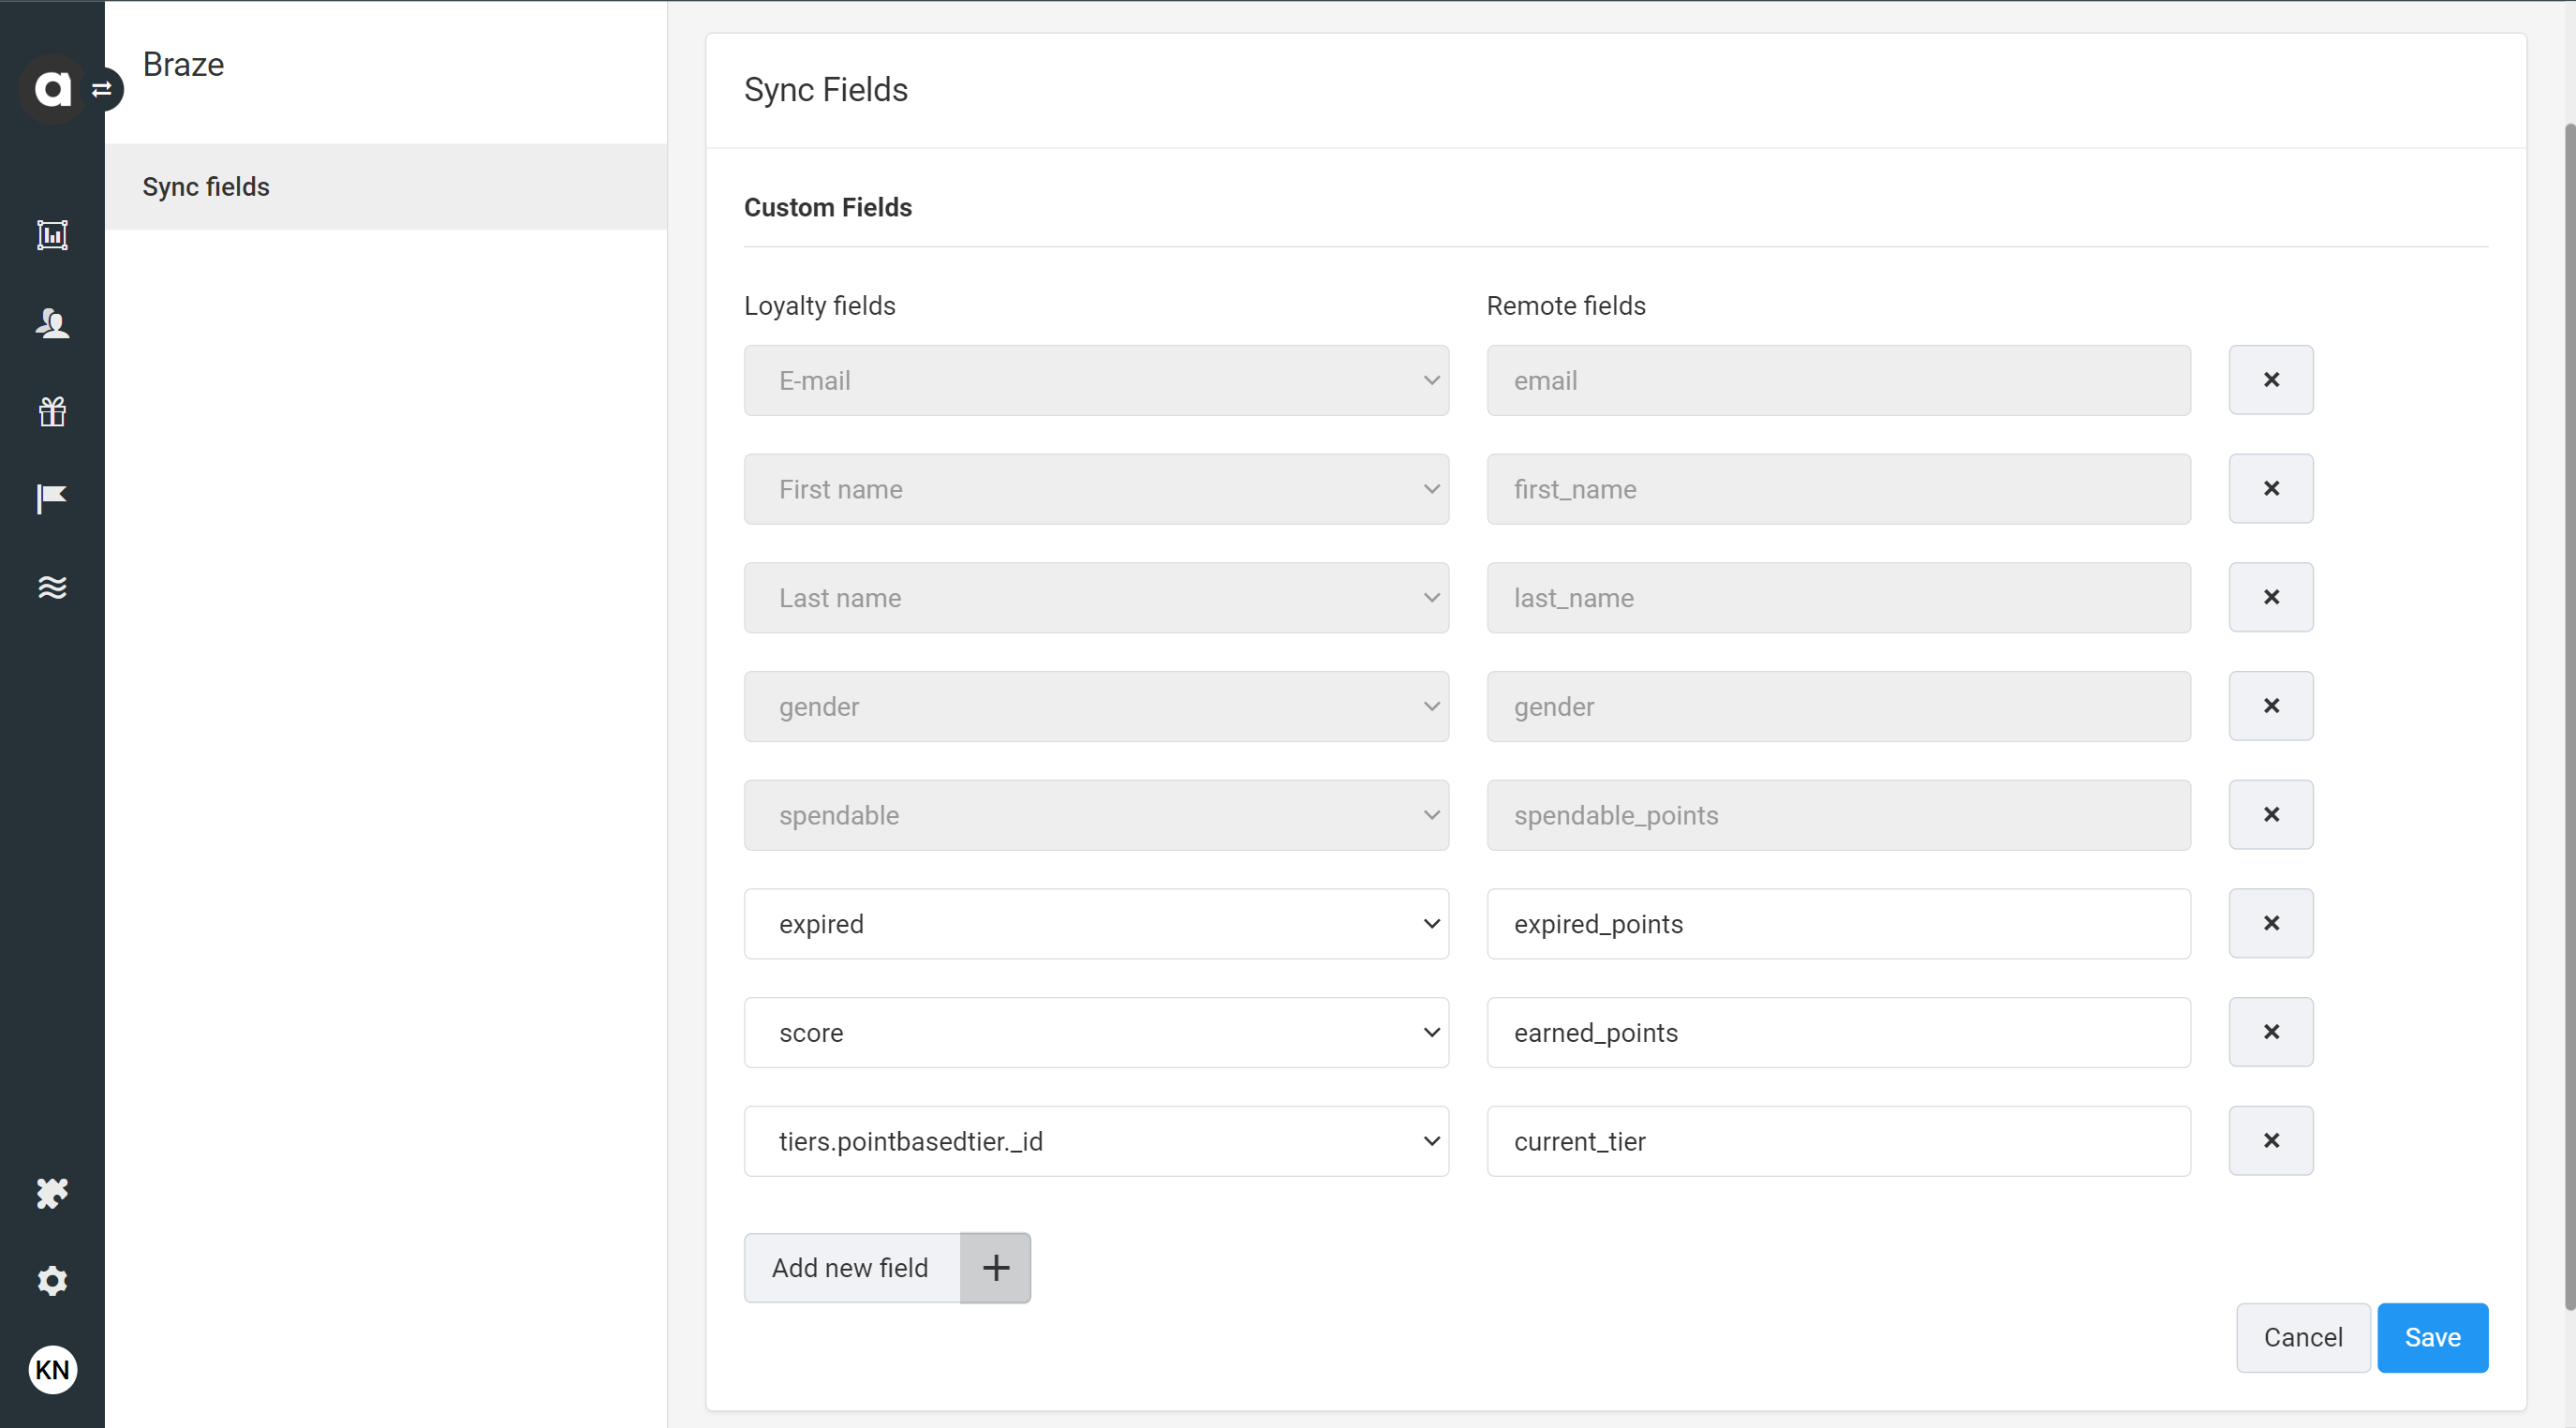 Sync Fields page in Antavo.